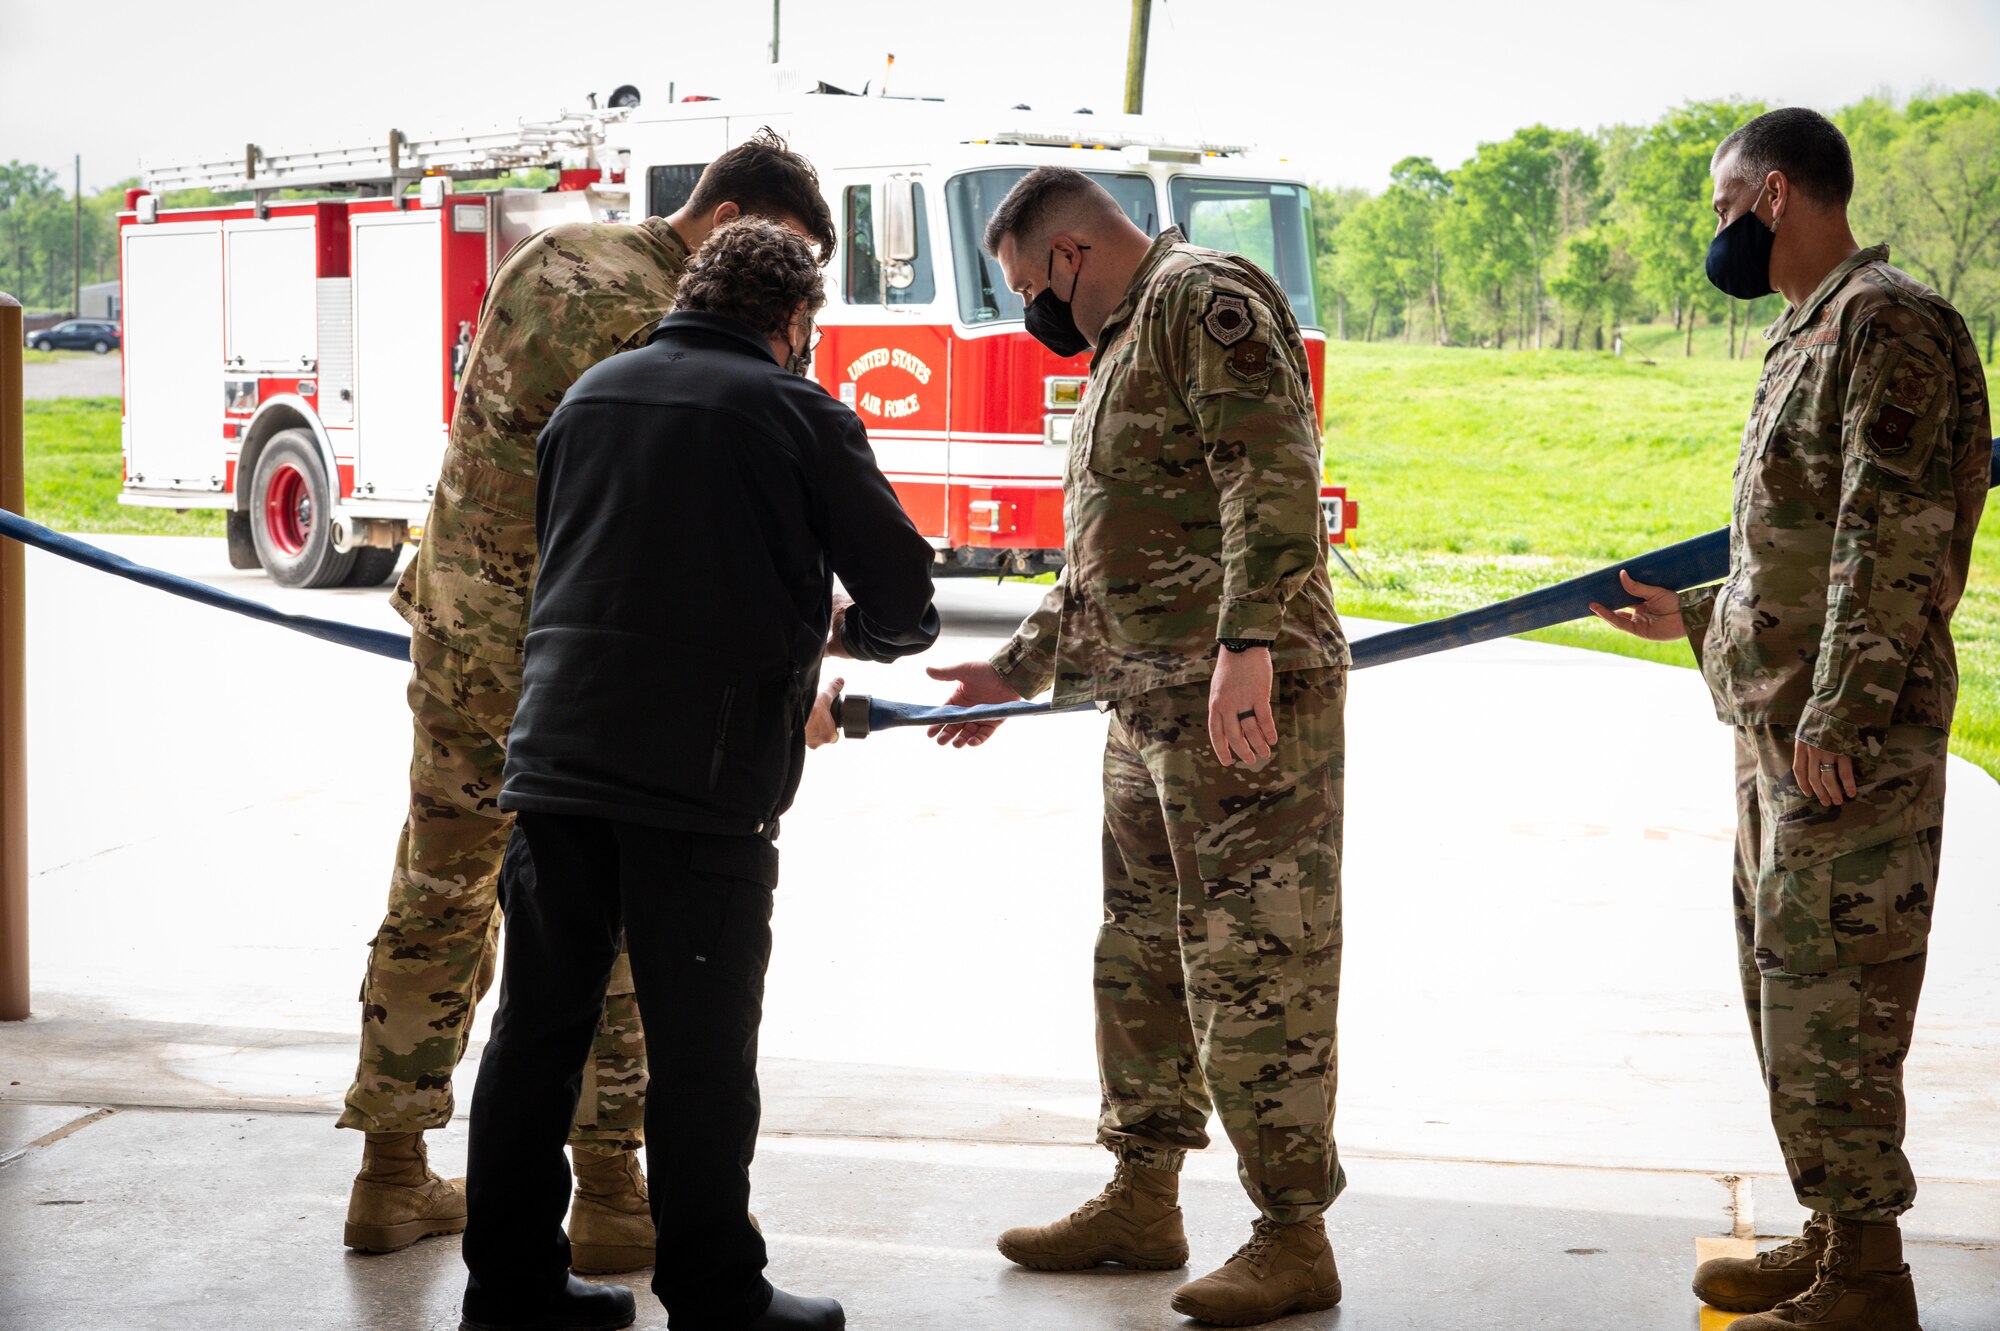 Col. Mark Dmytryszyn, 2nd Bomb Wing commander, middle, Lt. Col. Christopher Carnduff, 2nd Civil Engineer Squadron commander, right, Timothy Sprague, fire chief, middle left, and Amn. Maxwell Palmer, 2nd Civil Engineer Squadron firefighter, left, detach a connected fire hose symbolizing the cutting of a ribbon for Fire Station Two at Barksdale Air Force Base, Louisiana, April 7, 2021.